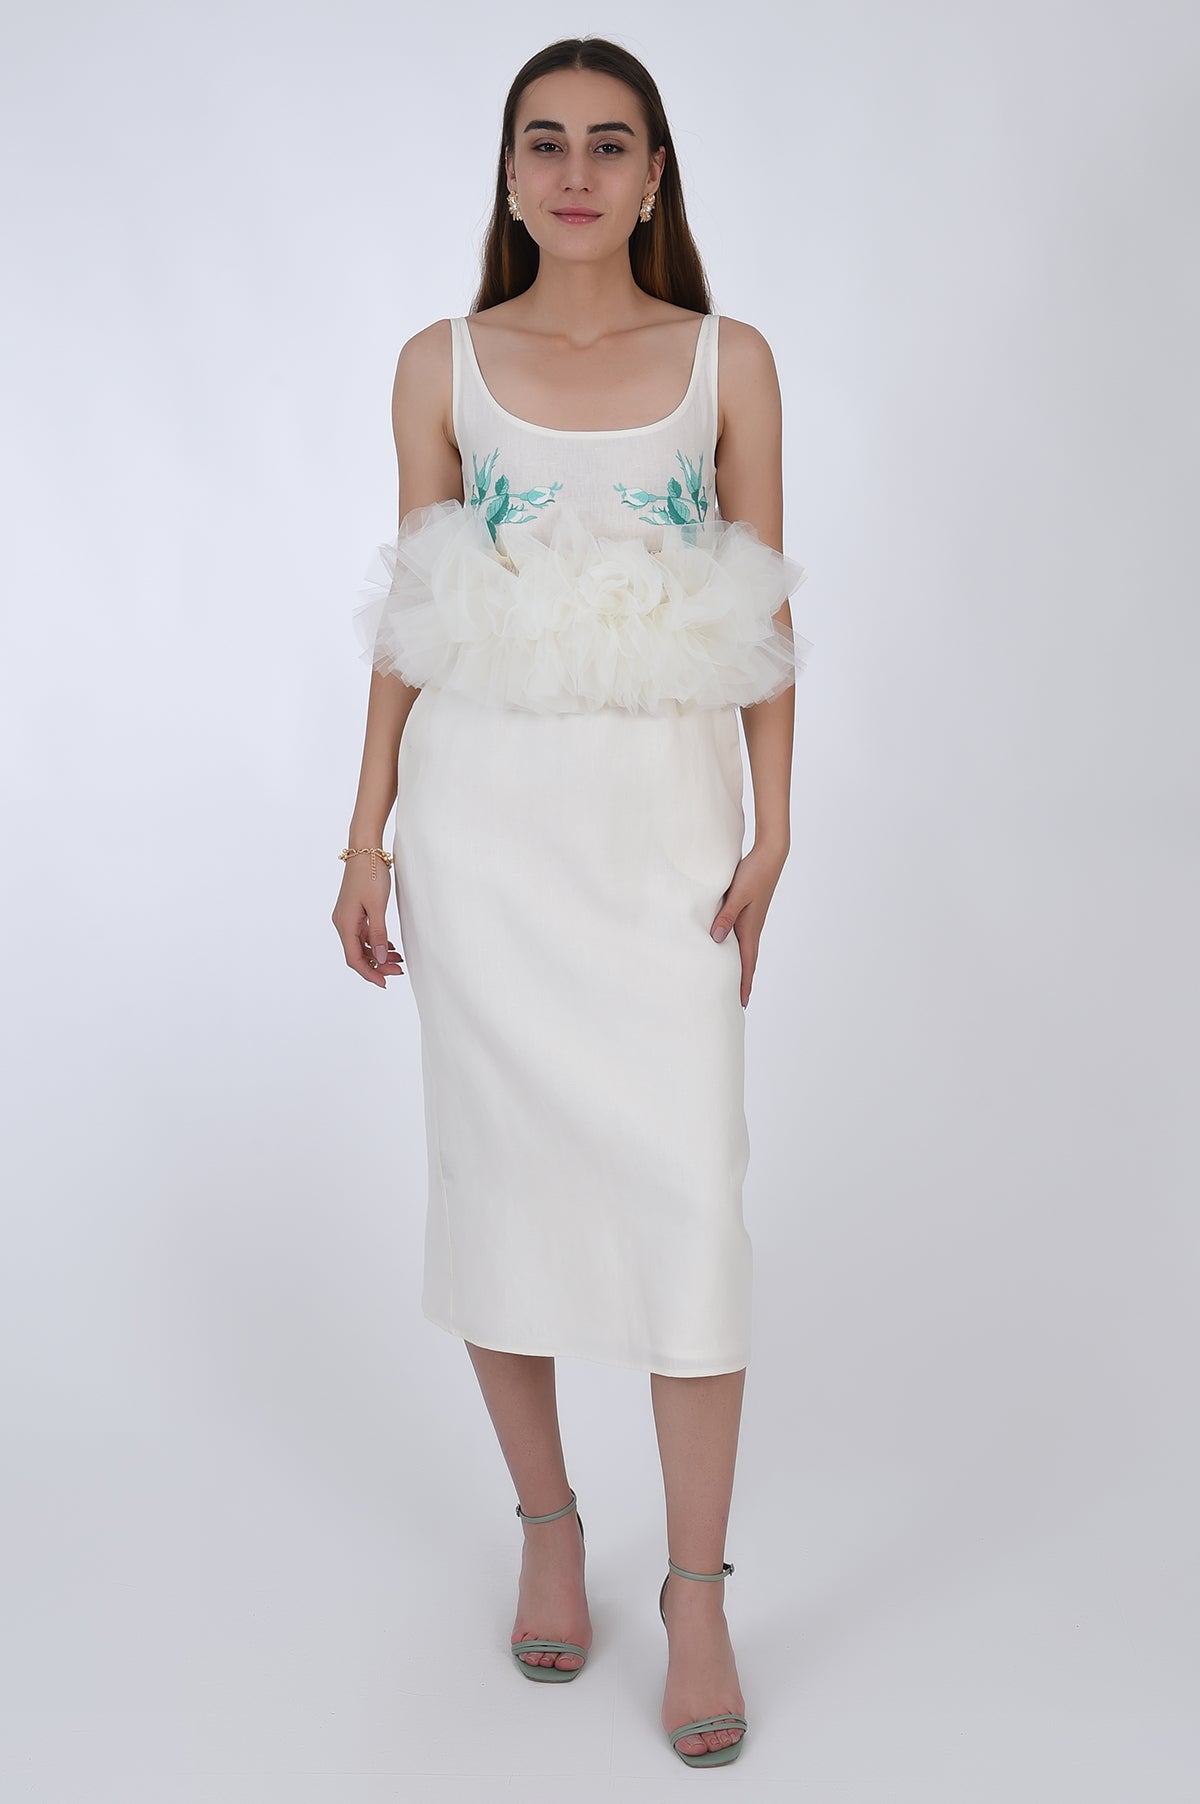 Fanm Mon Citra Linen &amp; Tulle Midi Dress, front view. Featuring embroidery detail at the chest, and tulling at the waist.  